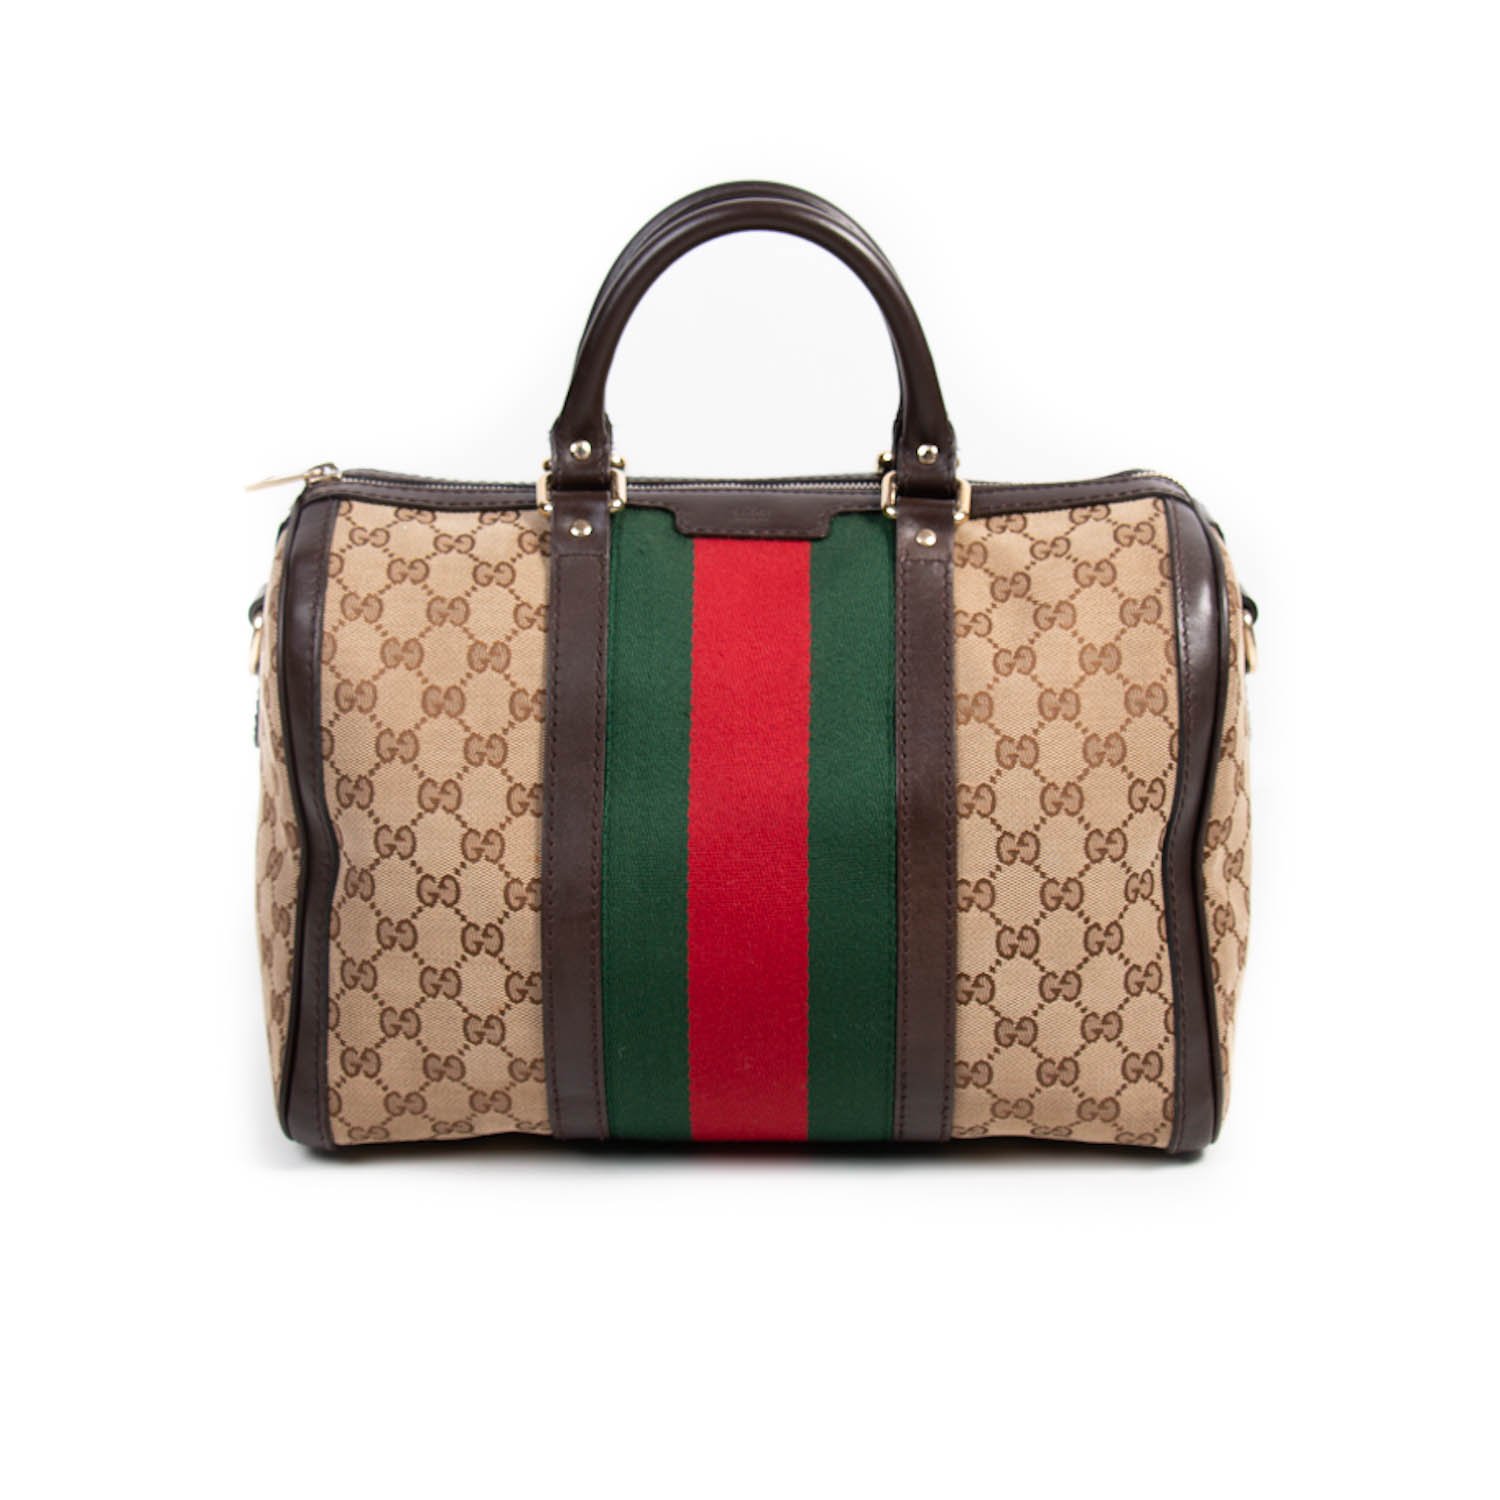 Be amazed at spectacular used Gucci purses comfortable